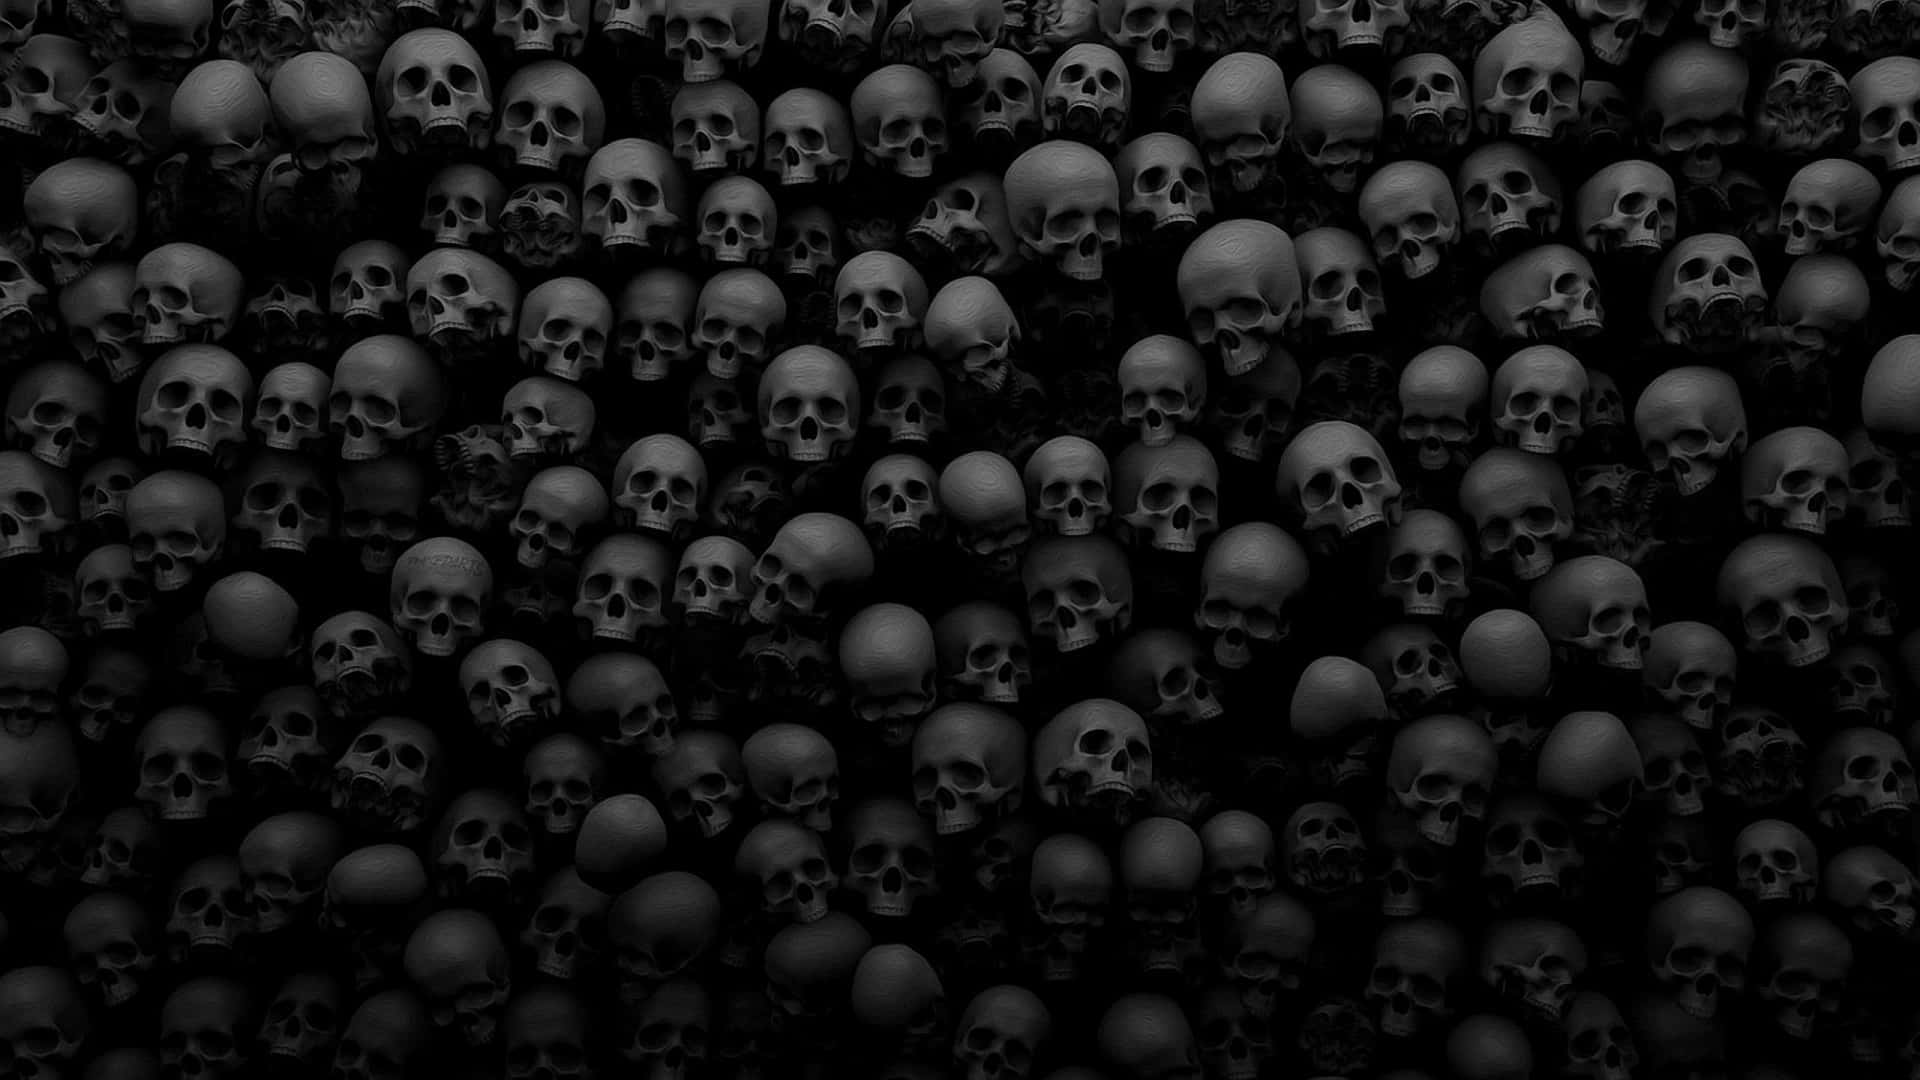 A Black Background With Many Skulls In It Wallpaper